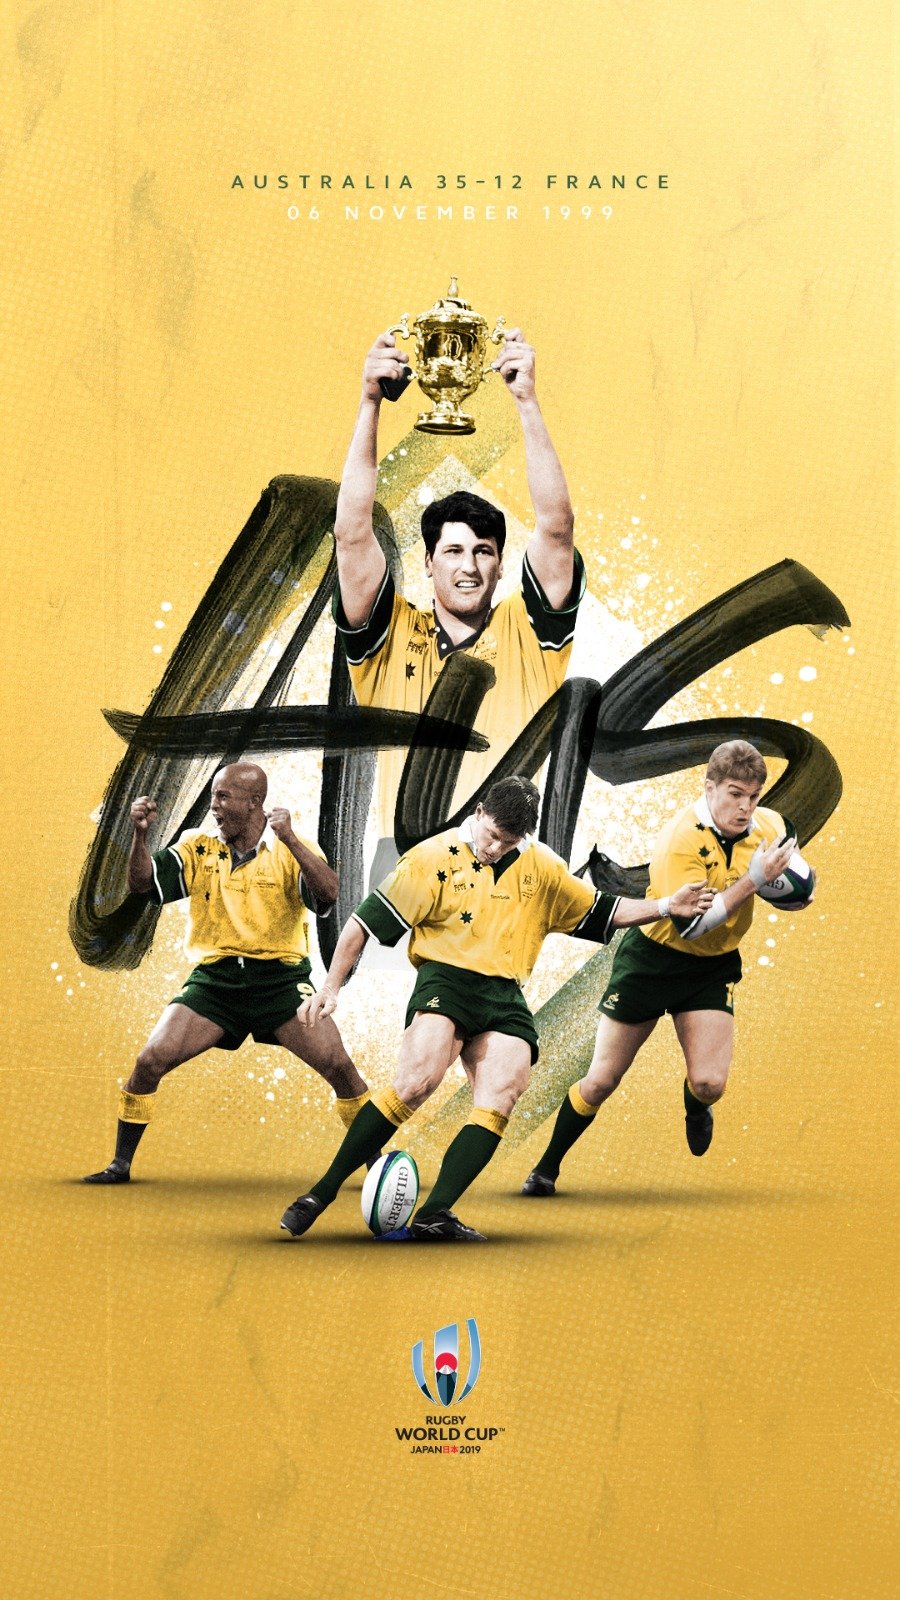 Rugby World Cup've got some team wallpaper for and fans. #AUSvWAL #RWC2019